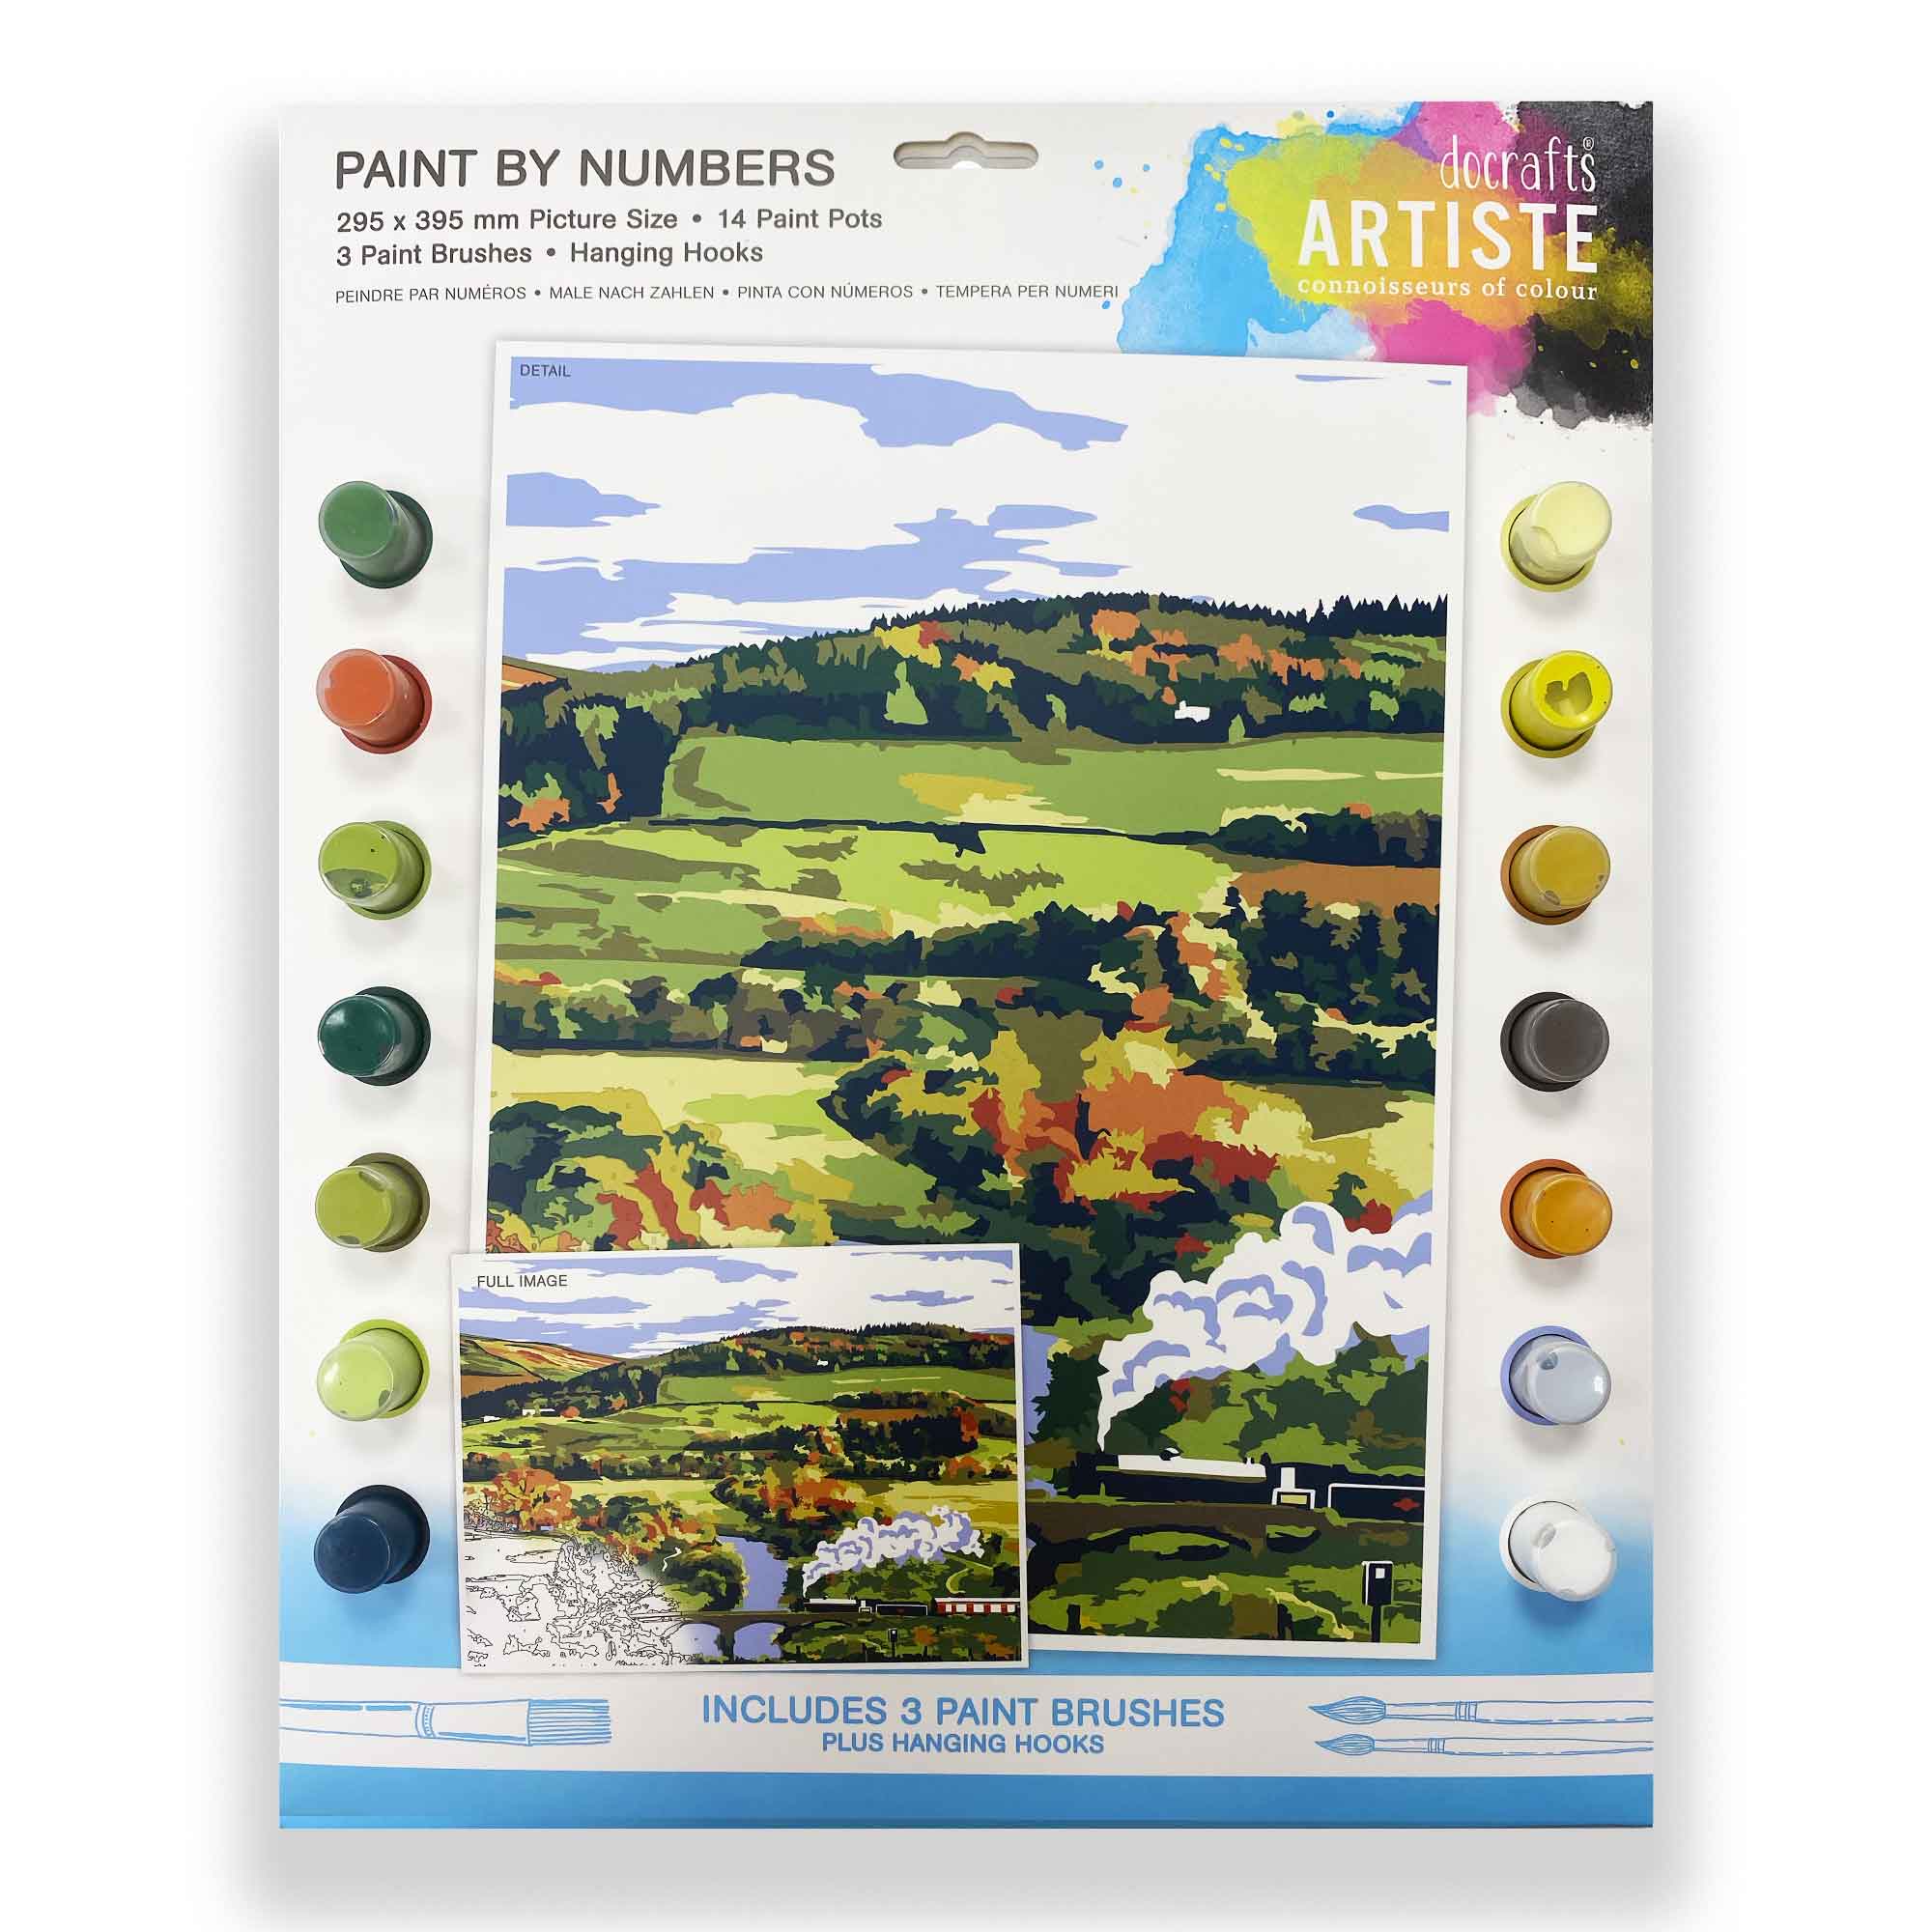 Docrafts Artiste Paint by Numbers (295 x 395mm) Steam Landscape